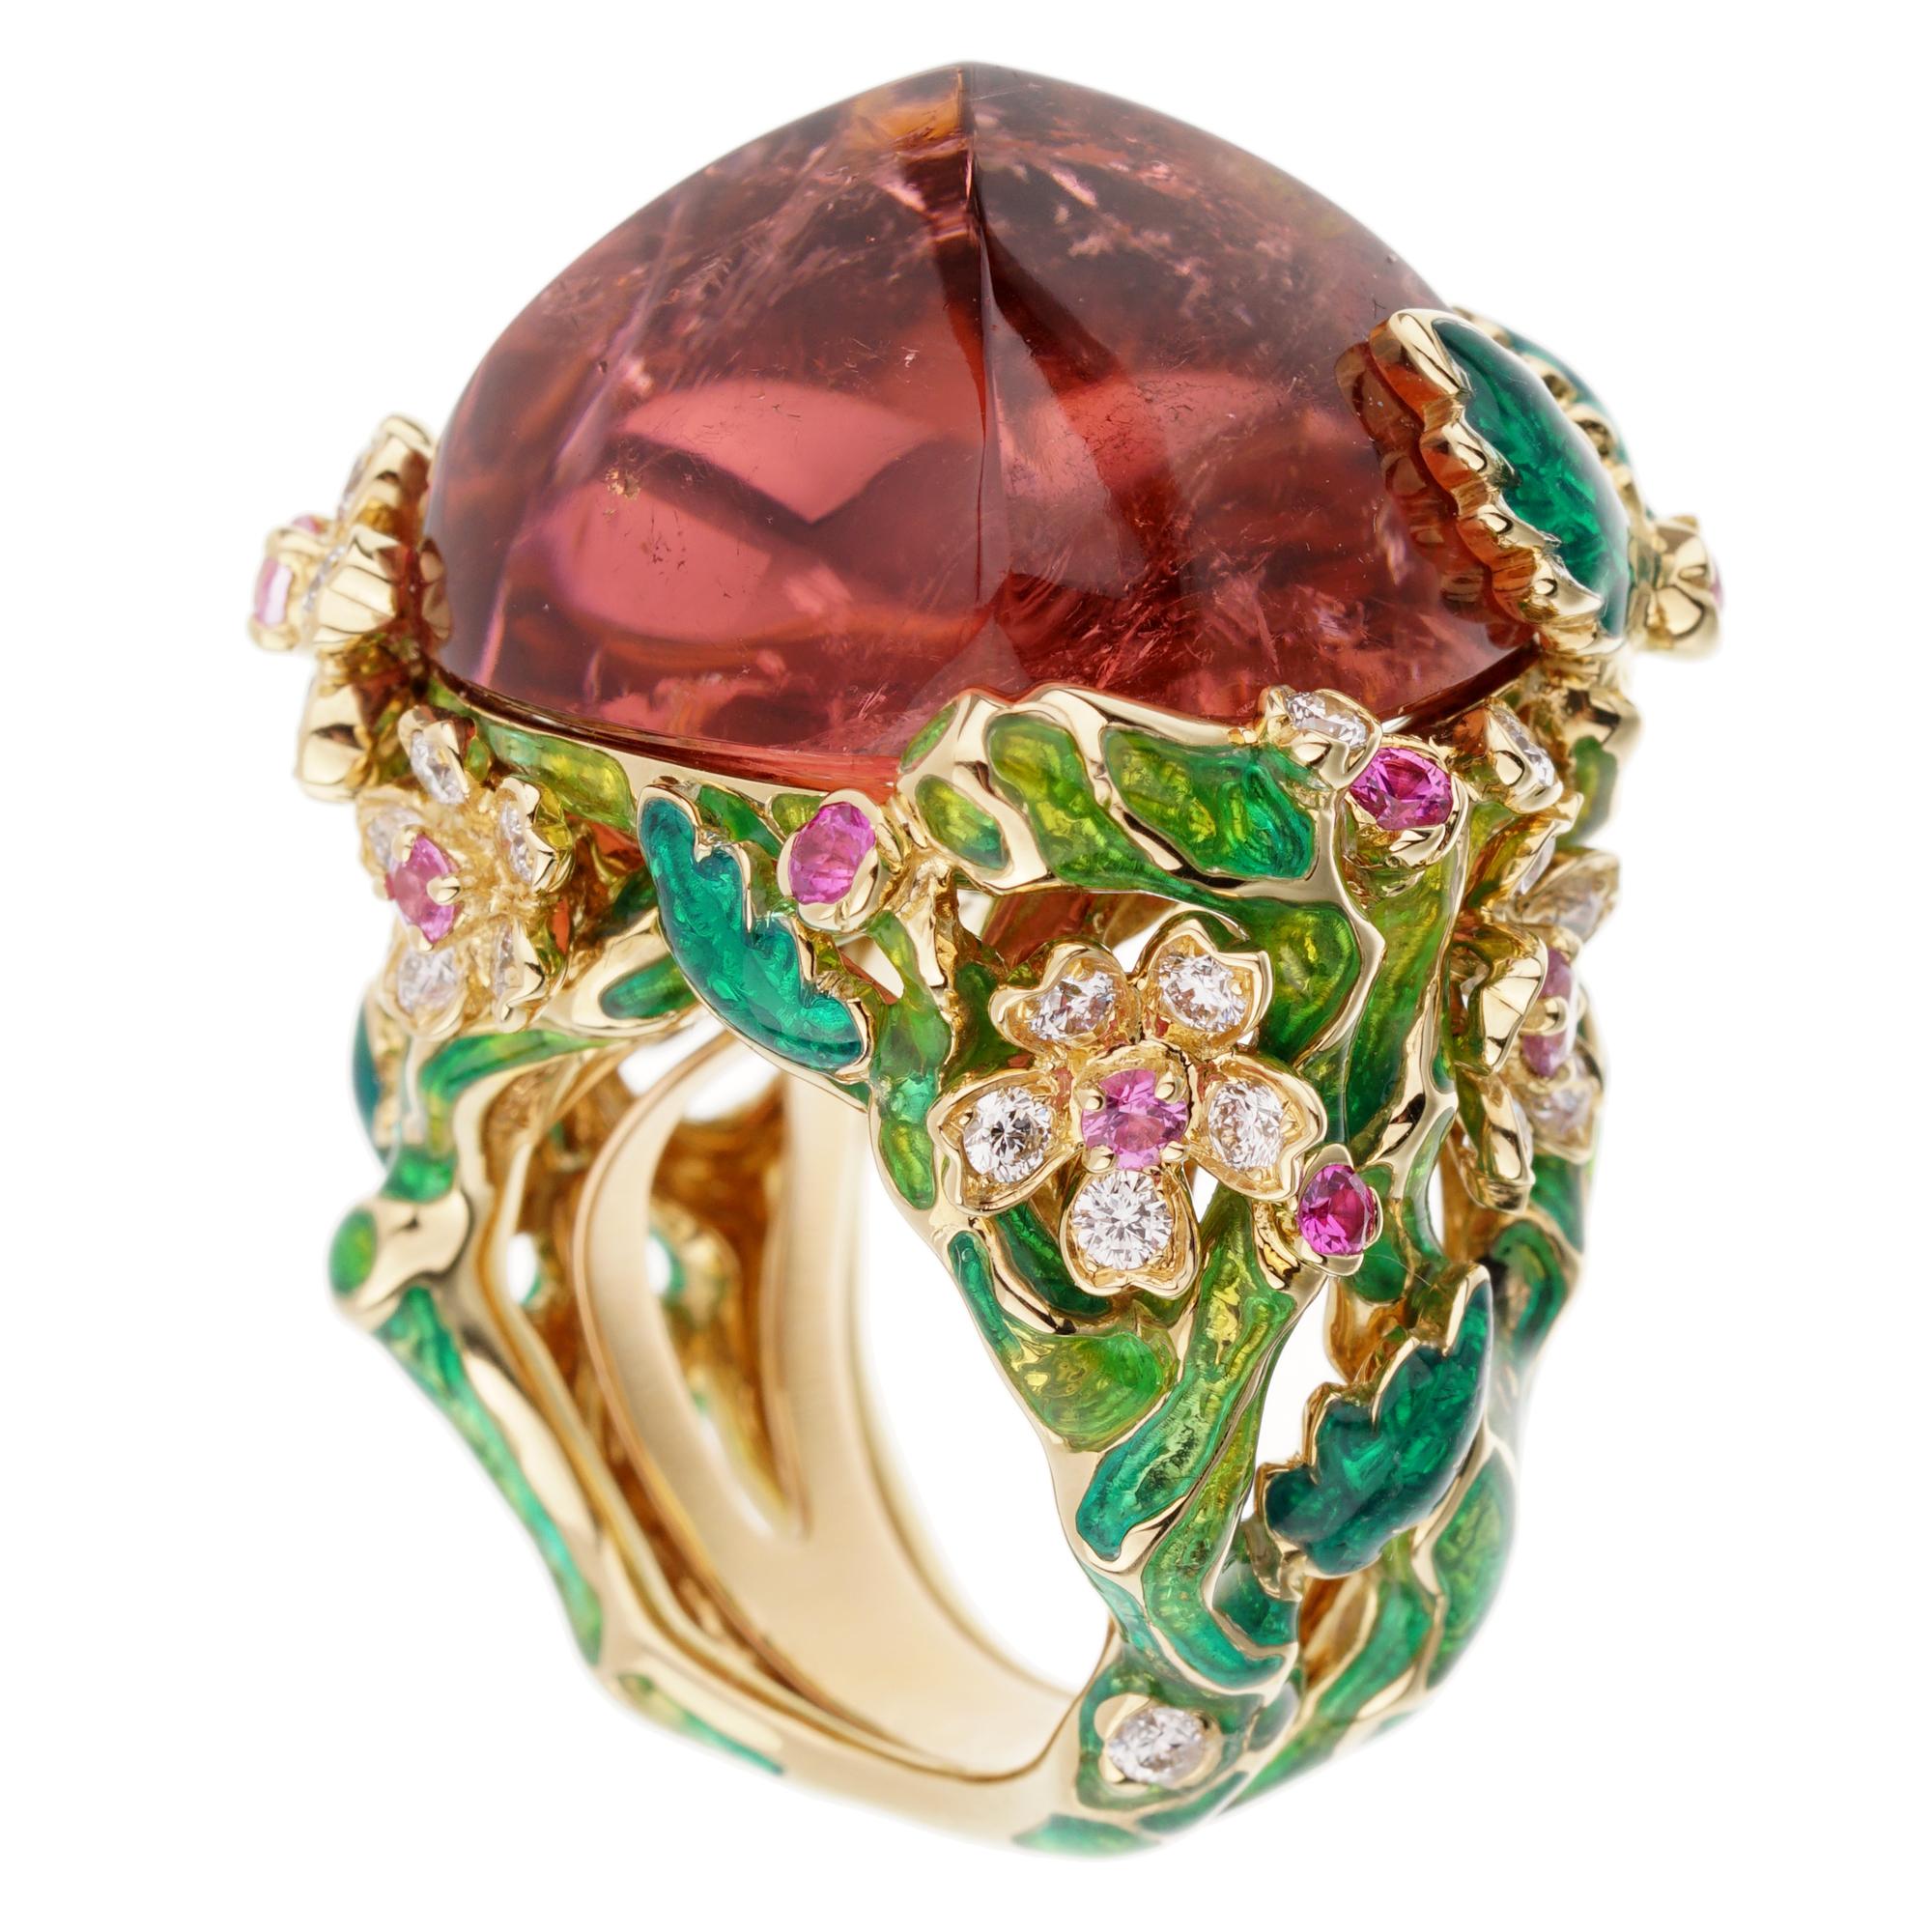 A work of art by Dior showcasing a massive 45ct sugarloaf rubellite adorned with diamonds flowers showcasing a pink sapphire and green enamel throughout the ring. The diamonds have a total weight of 1.22ct and the sapphires .63ct

Dior Retail Price: